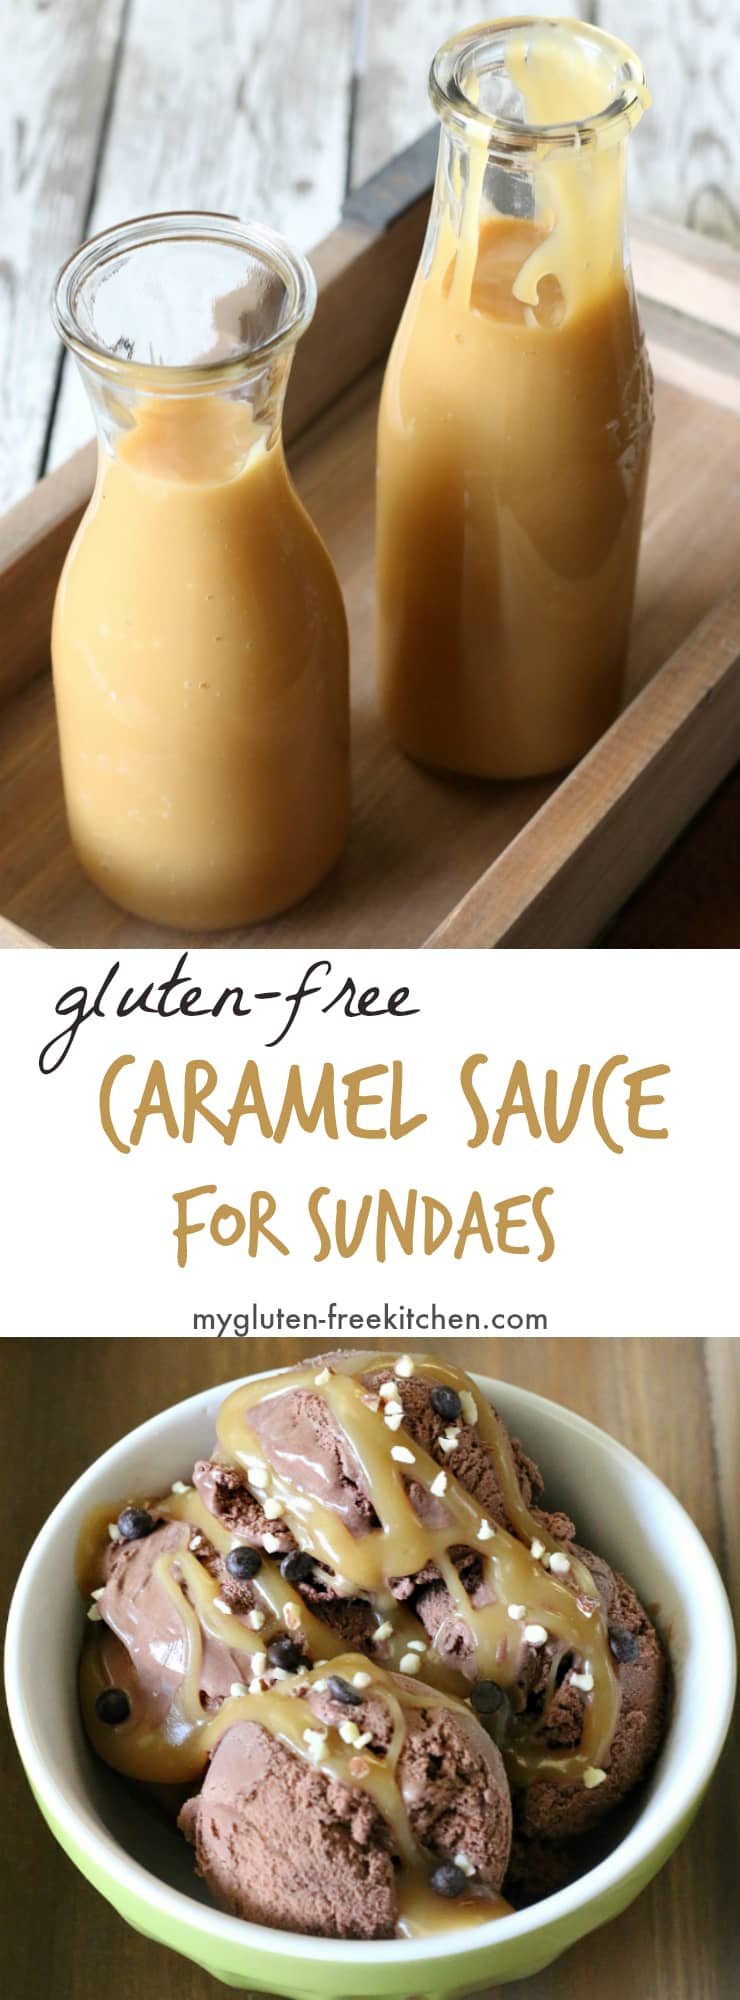 Gluten-free Caramel Sauce Recipe. This homemade caramel sauce is thick, creamy, buttery and perfectly sweet